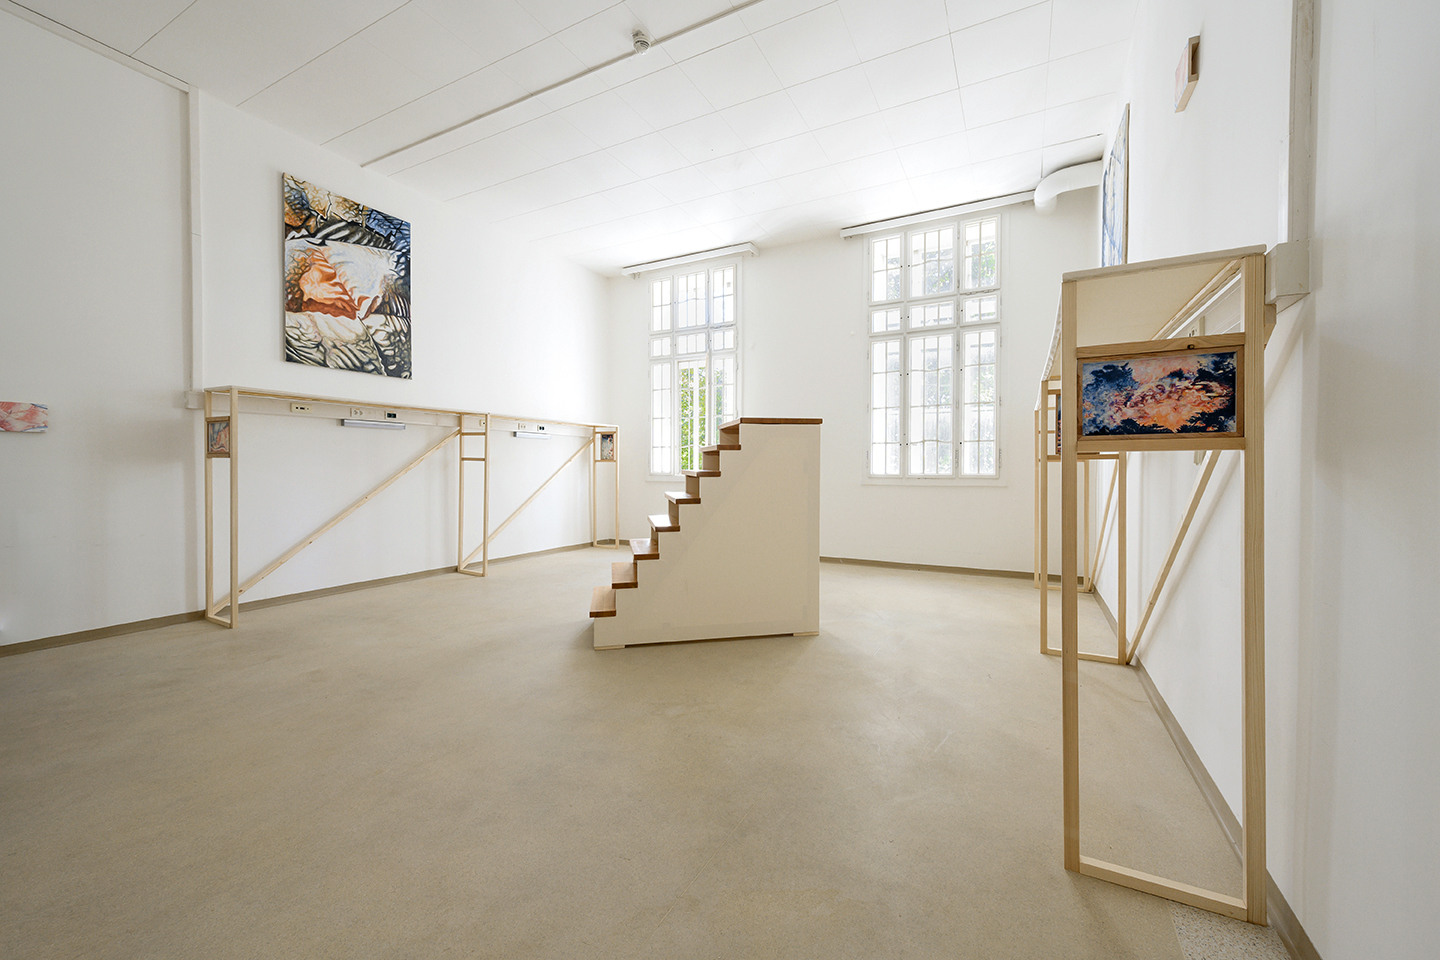 Aftersun & Afterwit, installation view, 2023 (c) eSeL.at - Joanna Pianka